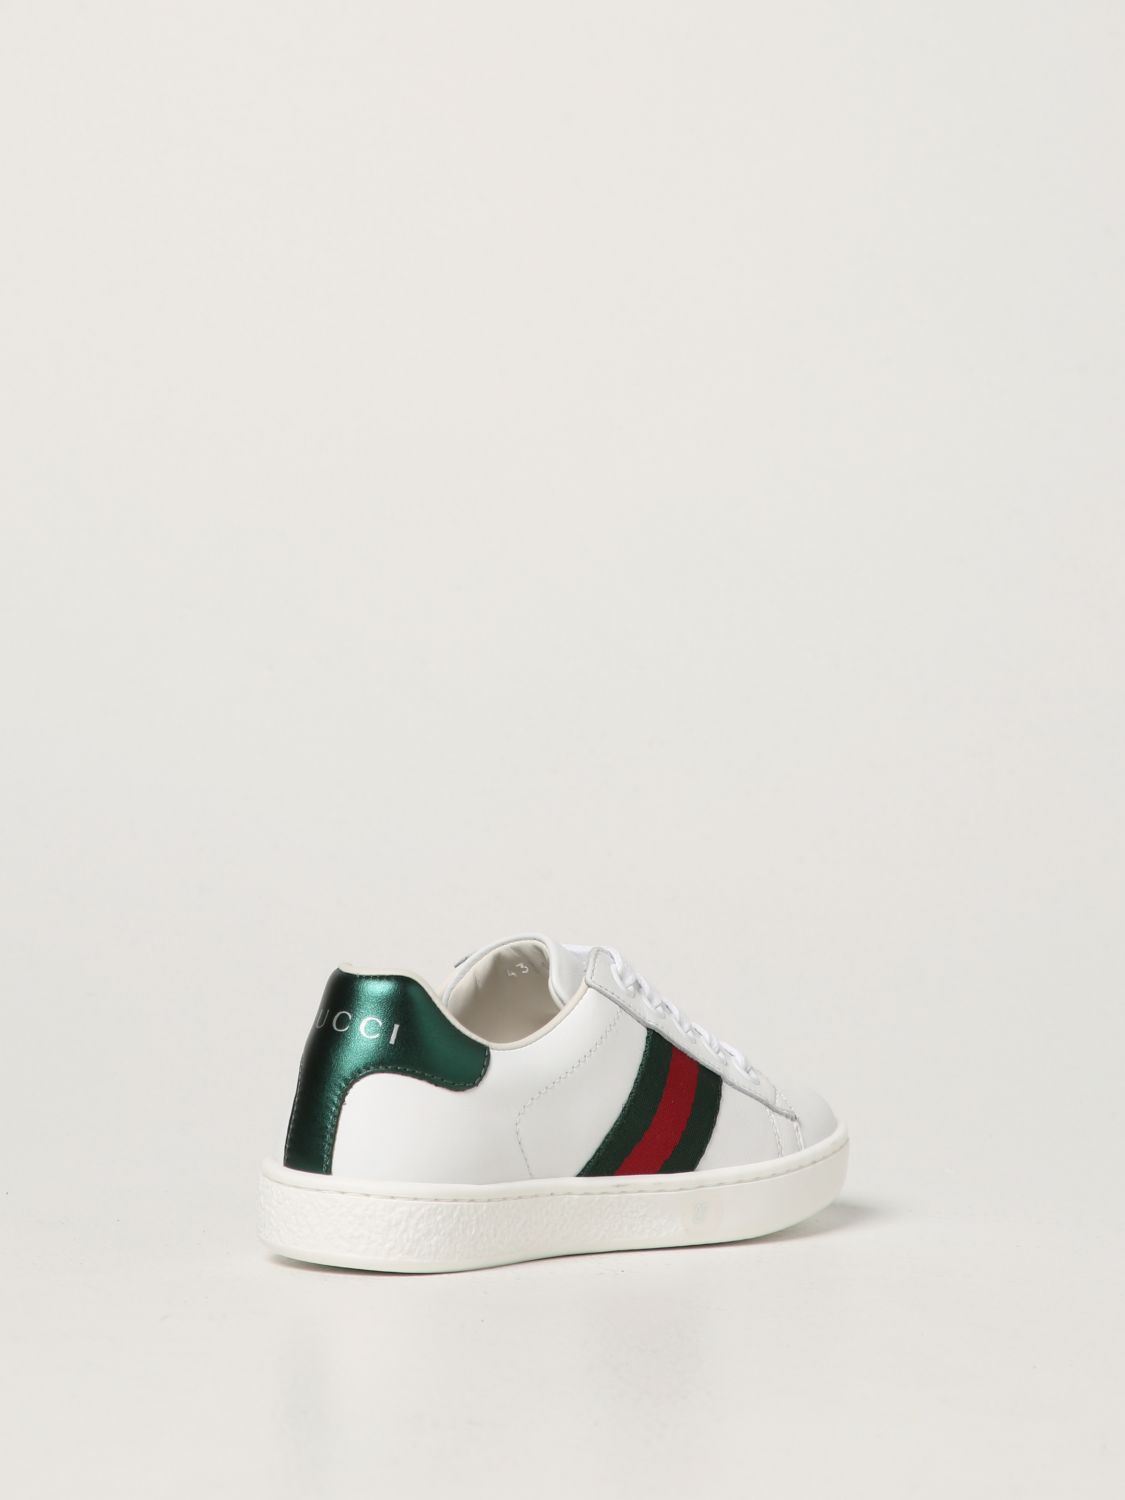 Shoes kids | Shoes Gucci Kids White | Shoes Gucci 433148 CPWE0 GIGLIO.COM